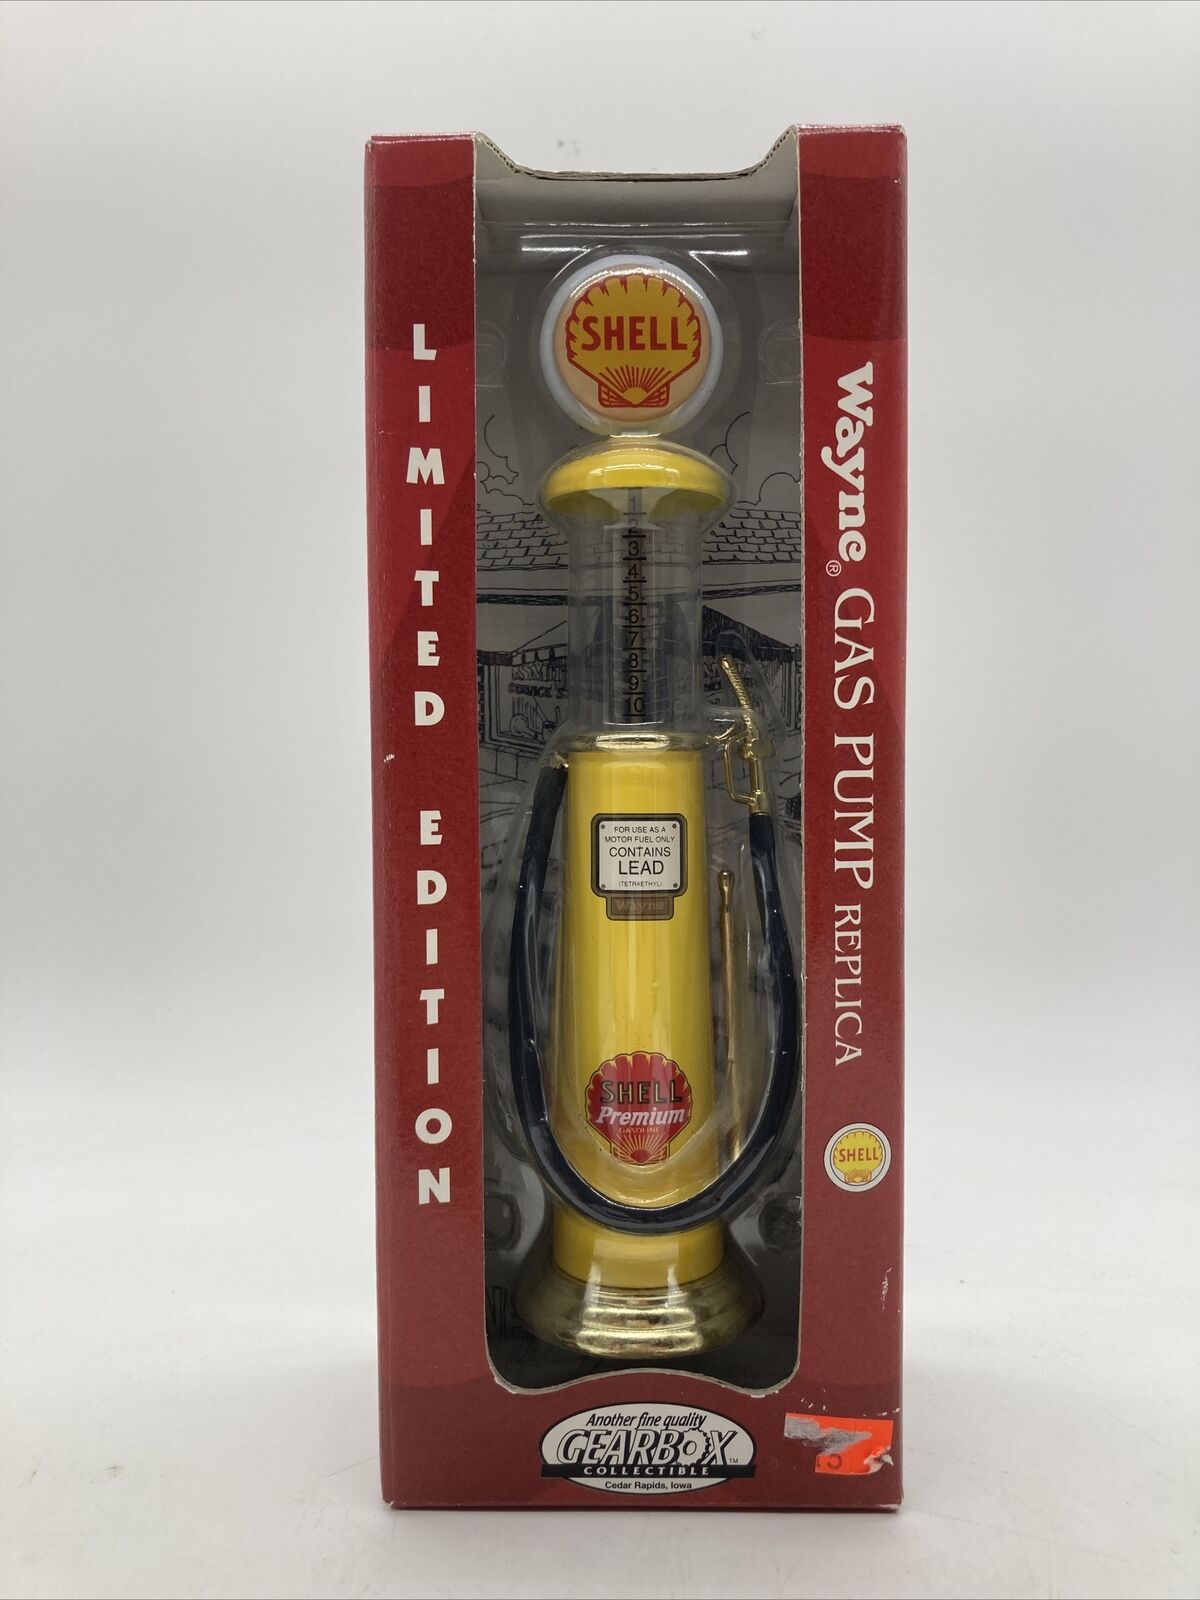 New Vintage Wayne 8” Shell Gas Pump 1996 Replica by GearBox Collectibles NIB